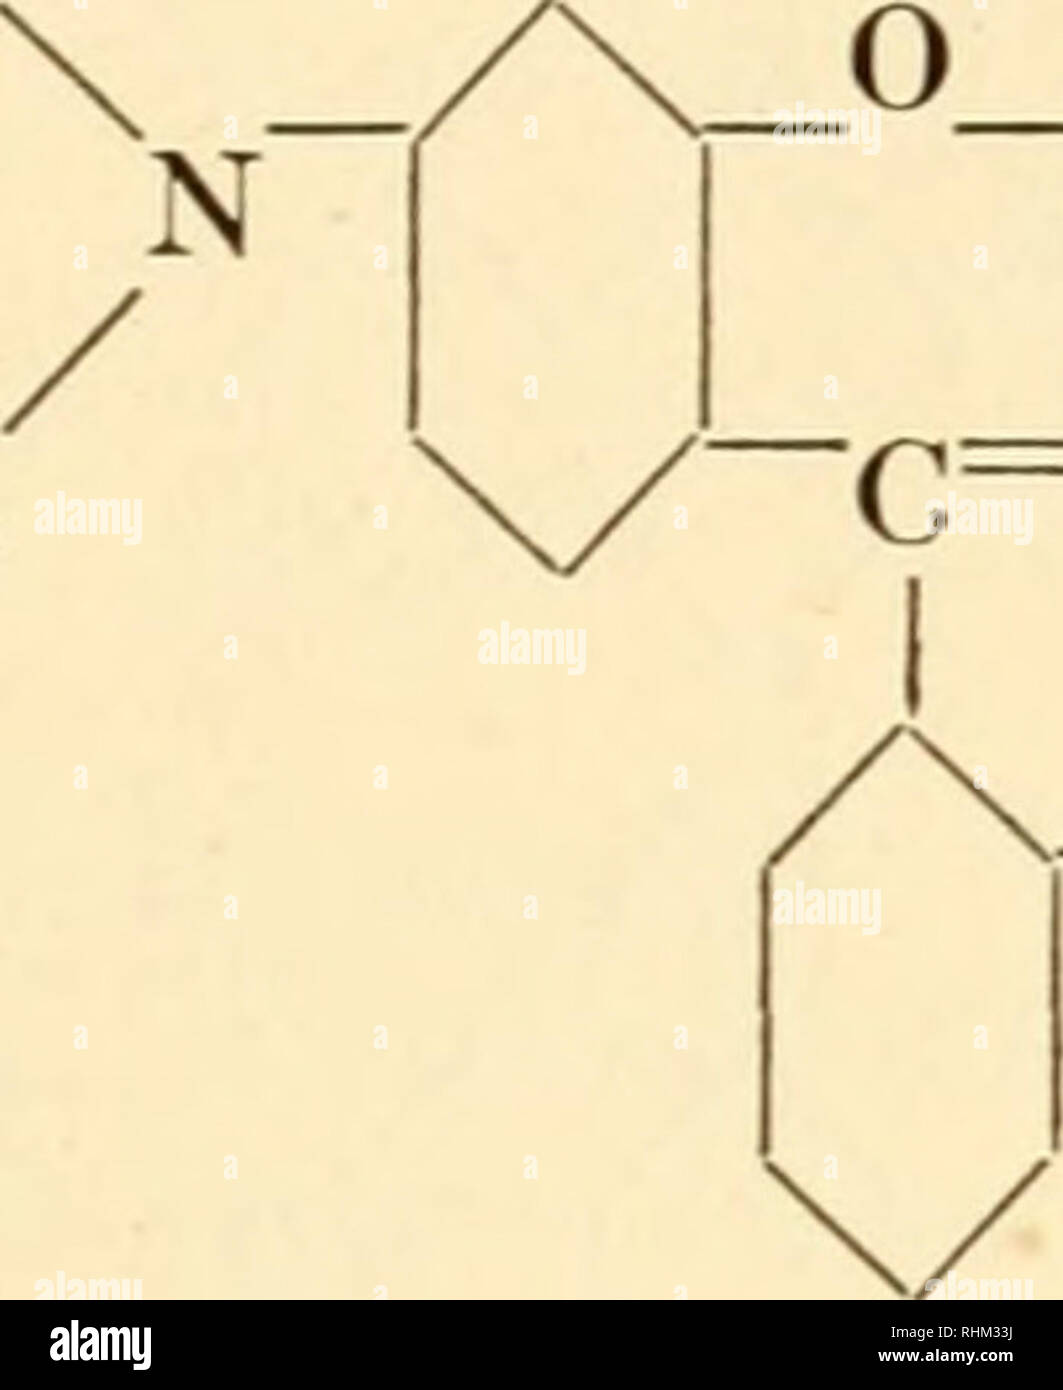 . Biological stains, a handbook on the nature and uses of the dyes employed in the biological laboratory. Stains and staining (Microscopy). 2. THE RHODAMINES The rhodamines are similar to the pyronins except that there is a third benzene ring attached to the central carbon atom and attached to this ring is a carboxyl group in the ortho position. This latter group, altho of acid tendency, does not counteract the basic action of the amino groups, so the dyes are basic in character. Only one of them is of any significance to the biologist, namely: CH.CH 3 ^^^2 RHODAMINE B C. I. NO. 749 Synonyms:  Stock Photo